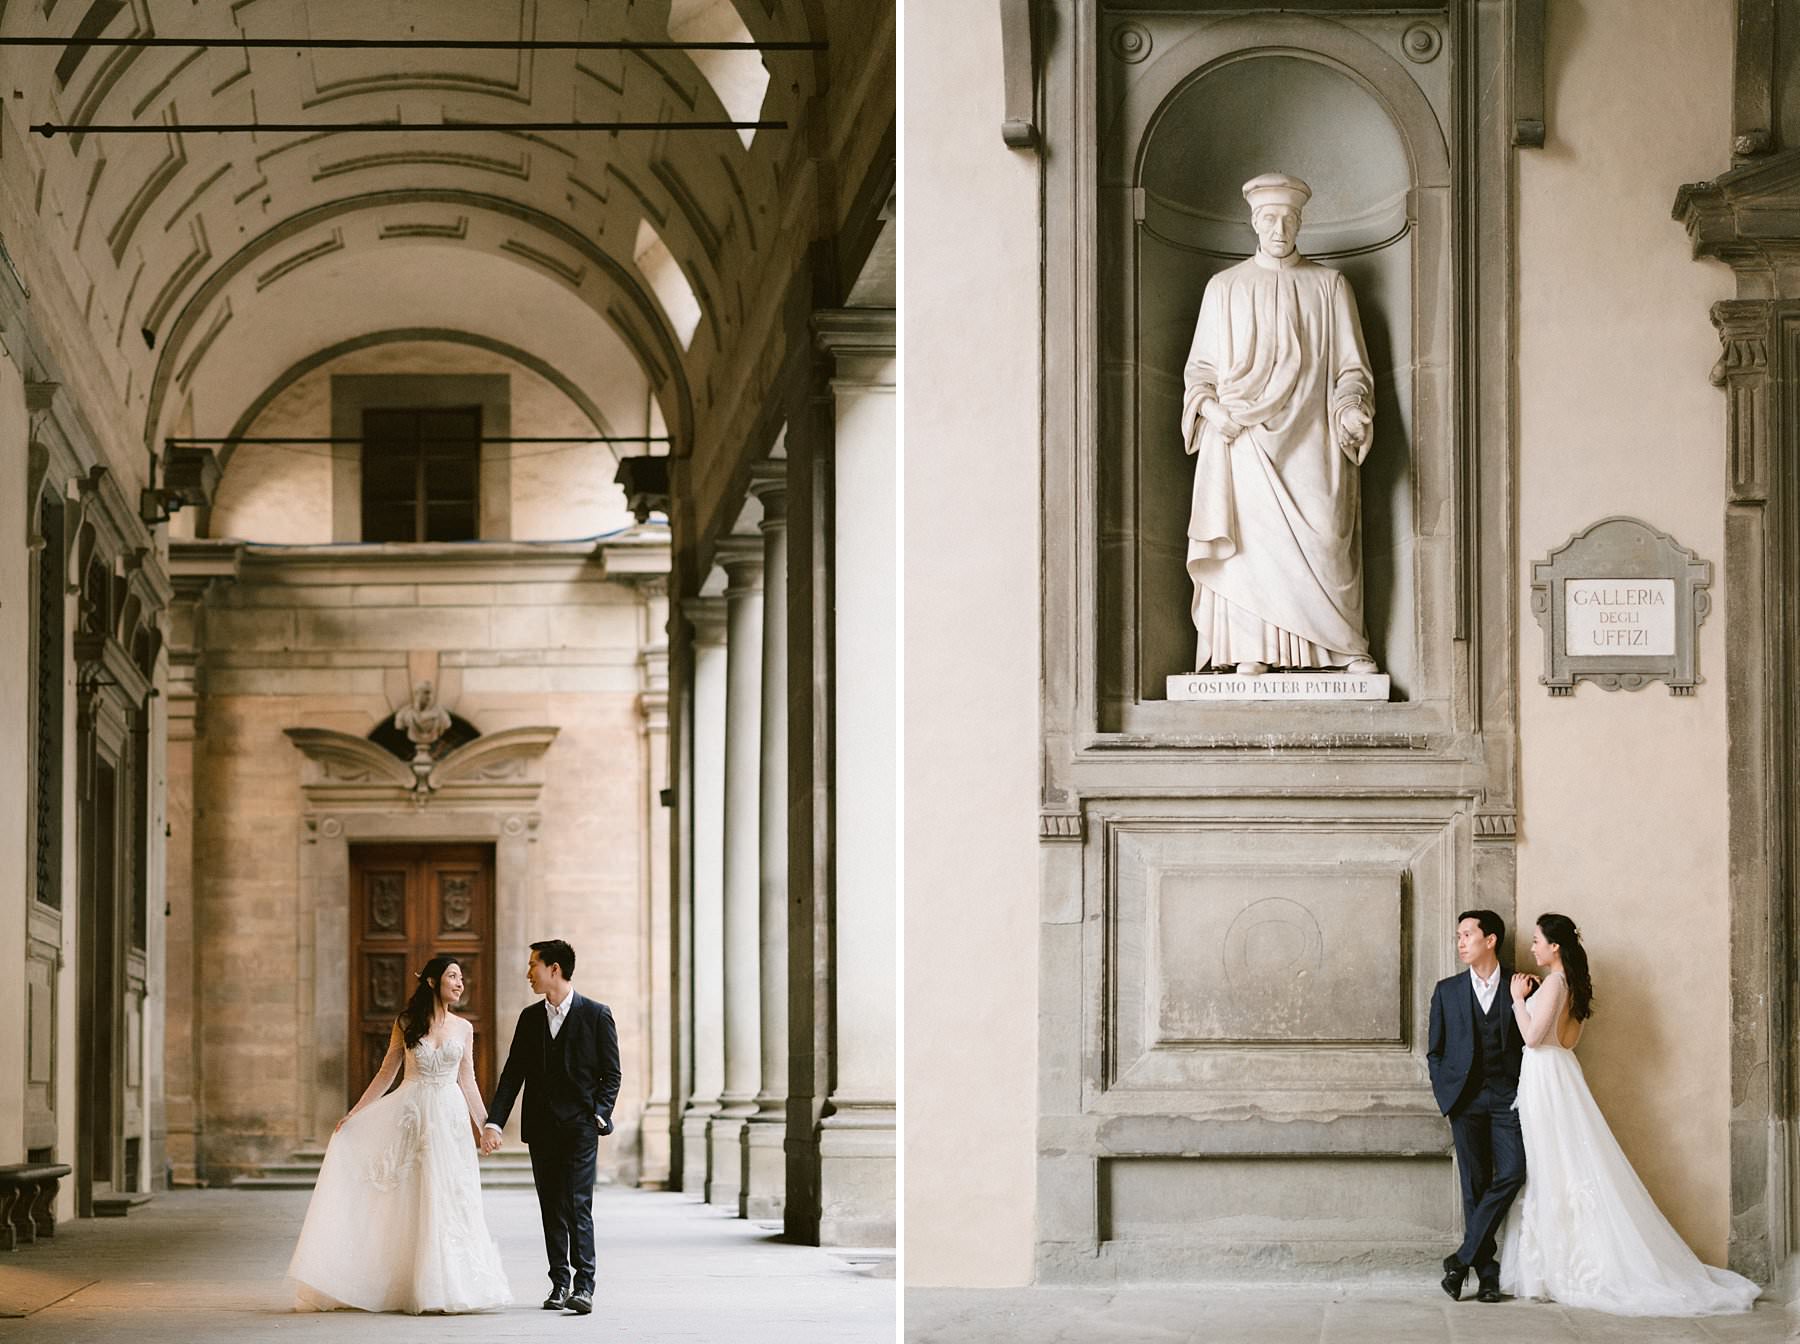 Romantic couple photos for a special honeymoon in Florence during covid-19 pandemic. Enjoy the priceless feeling of walking around the Uffizi Art Gallery with no tourist crowds